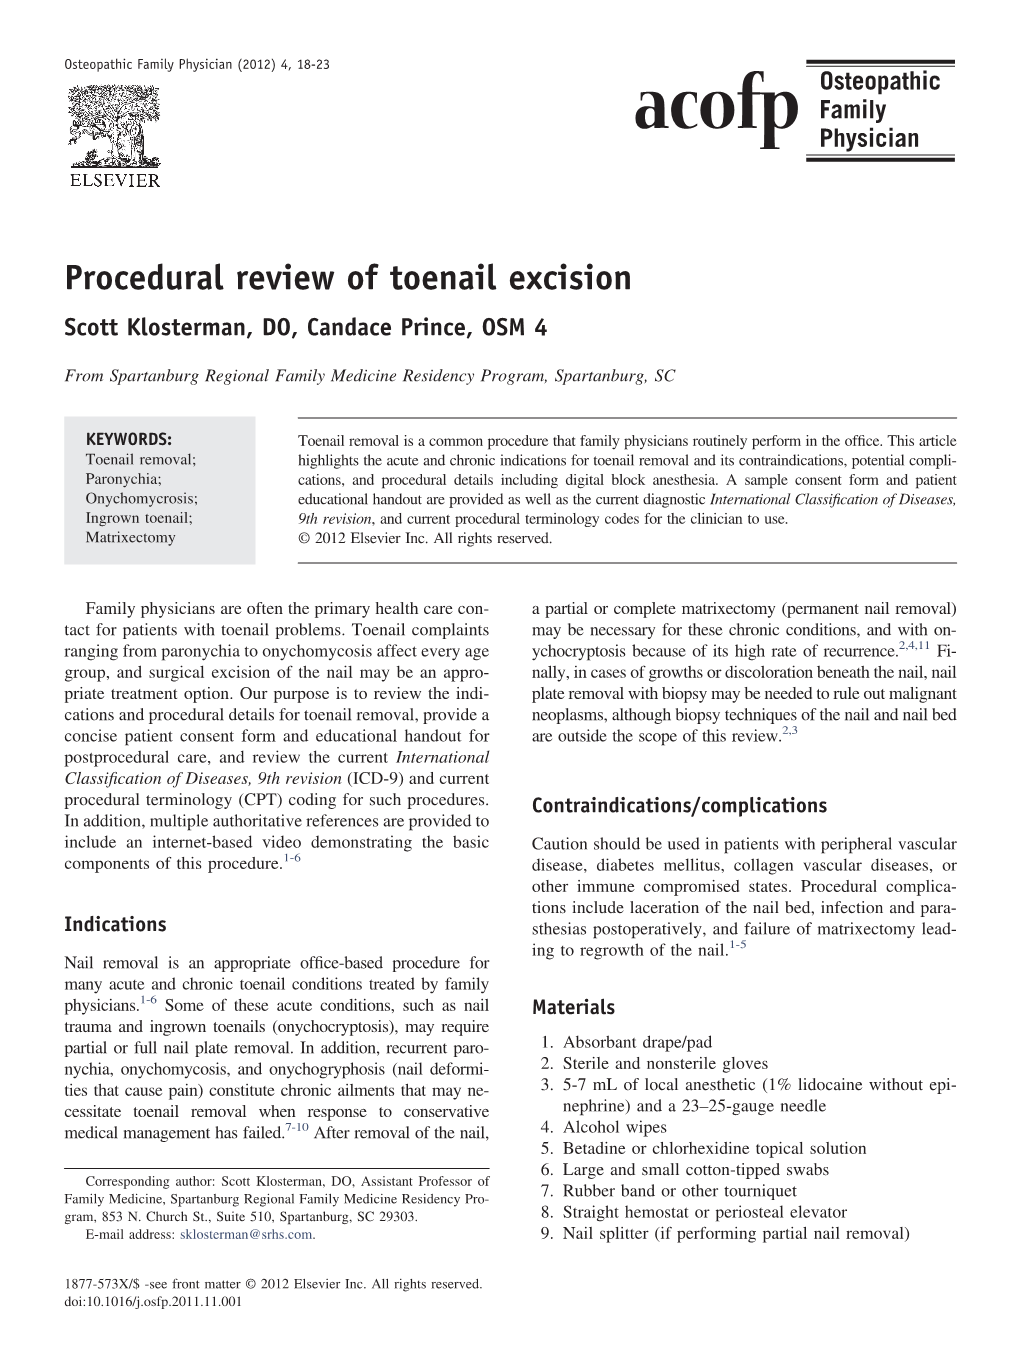 Procedural Review of Toenail Excision Scott Klosterman, DO, Candace Prince, OSM 4